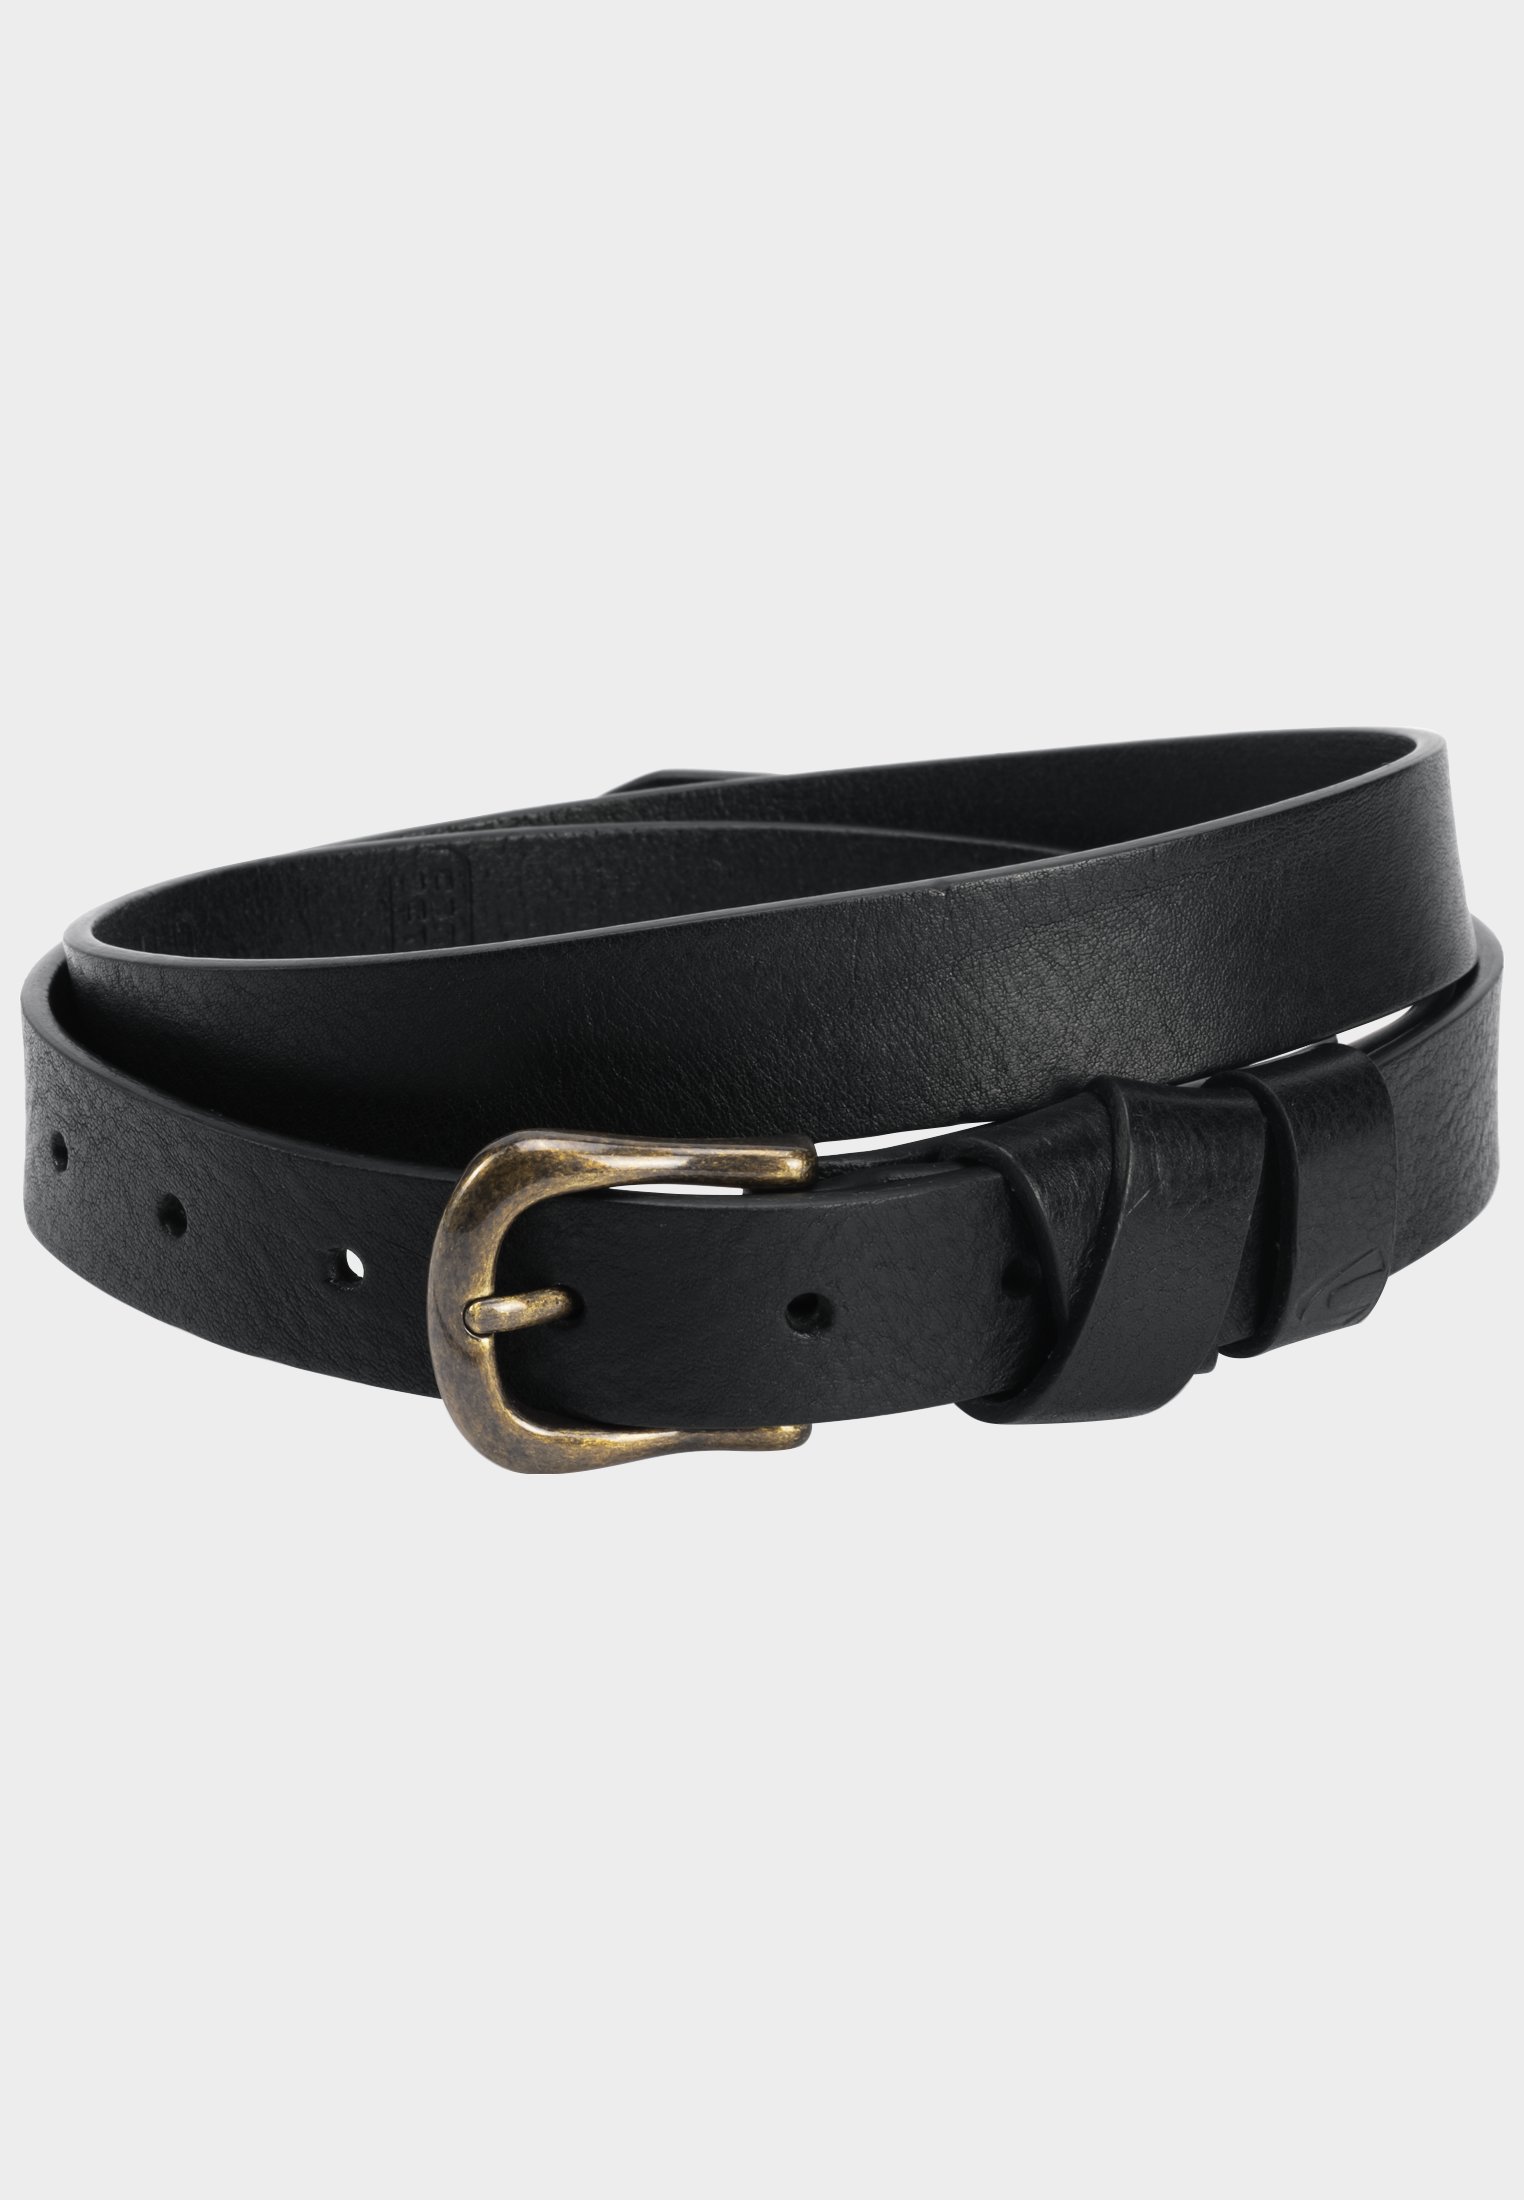 Camel Active Belt made of high quality leather